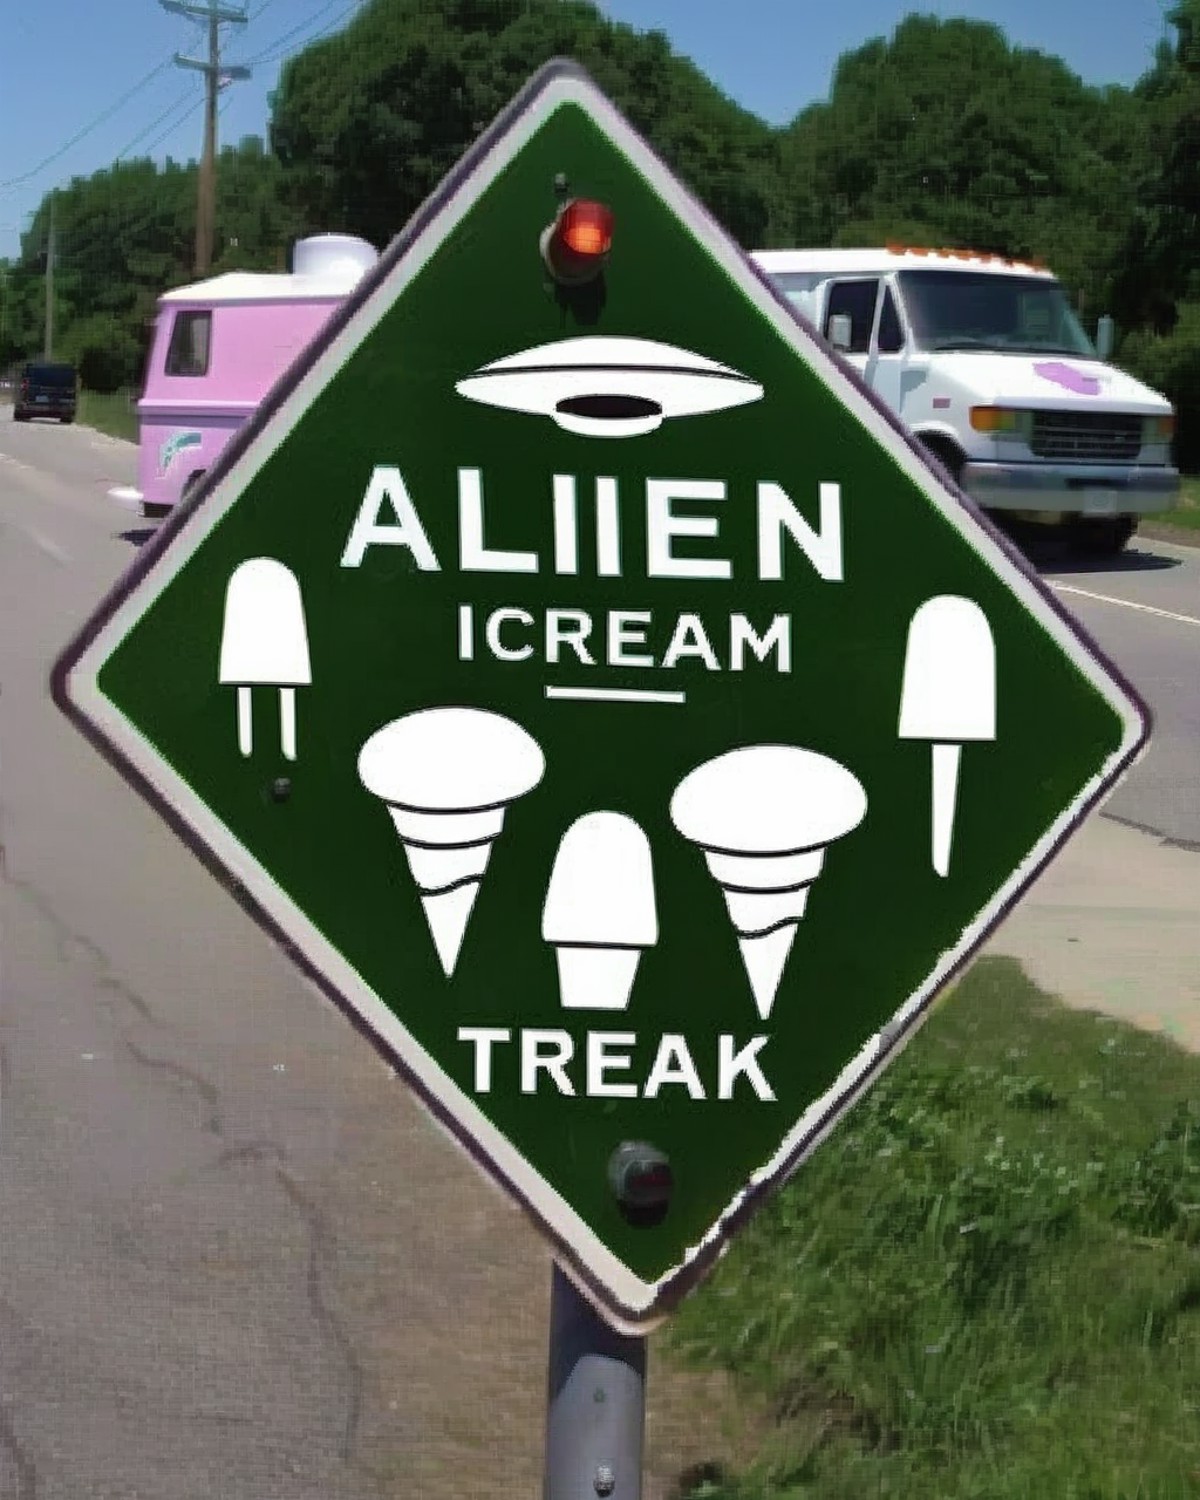 a photo of a road sign , Alien Ice Cream Truck Ahead:1.2, an extraterrestrial-themed sign indicating the presence of an "A...